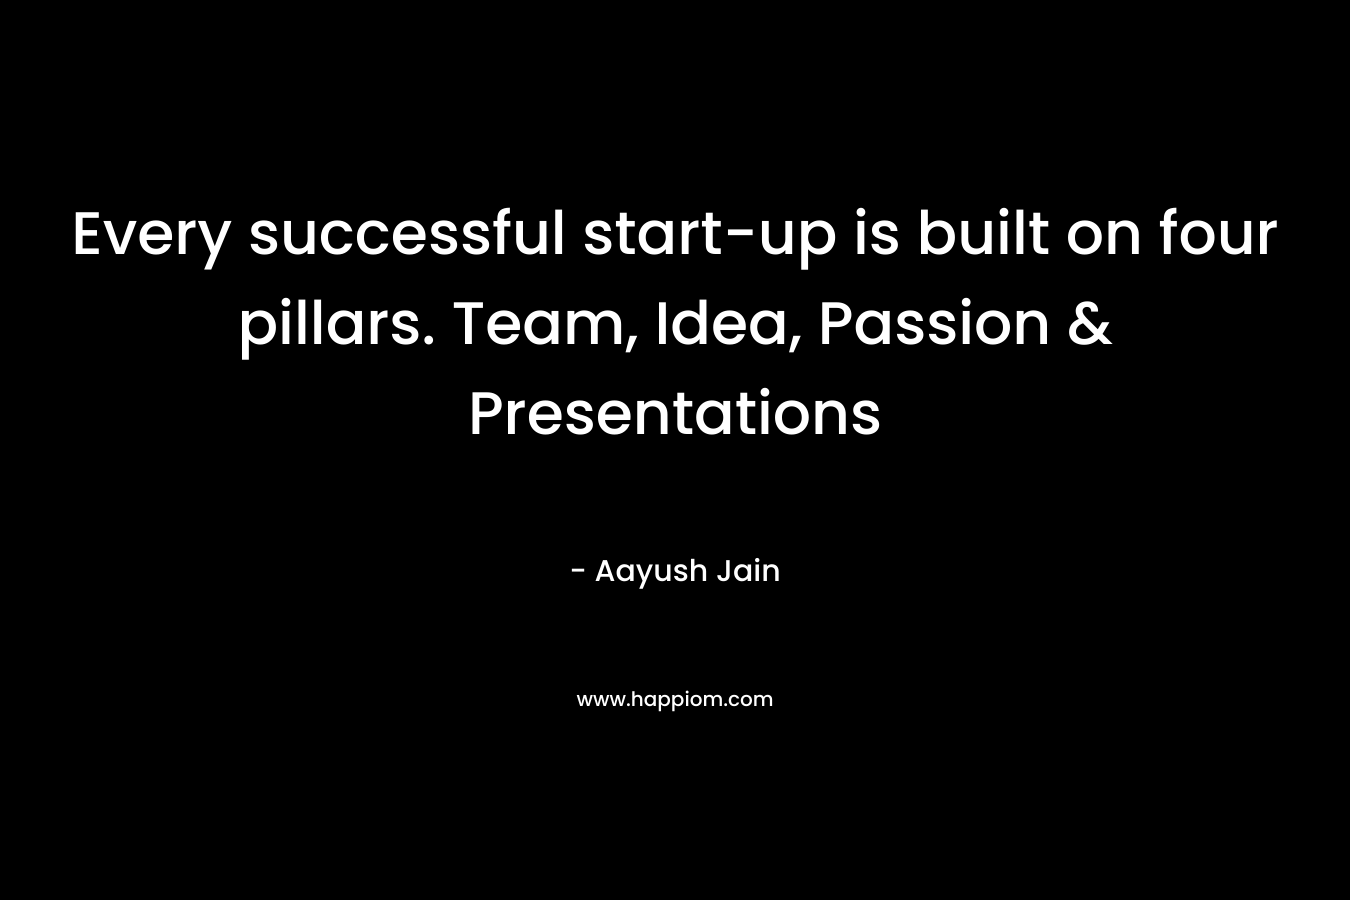 Every successful start-up is built on four pillars. Team, Idea, Passion & Presentations